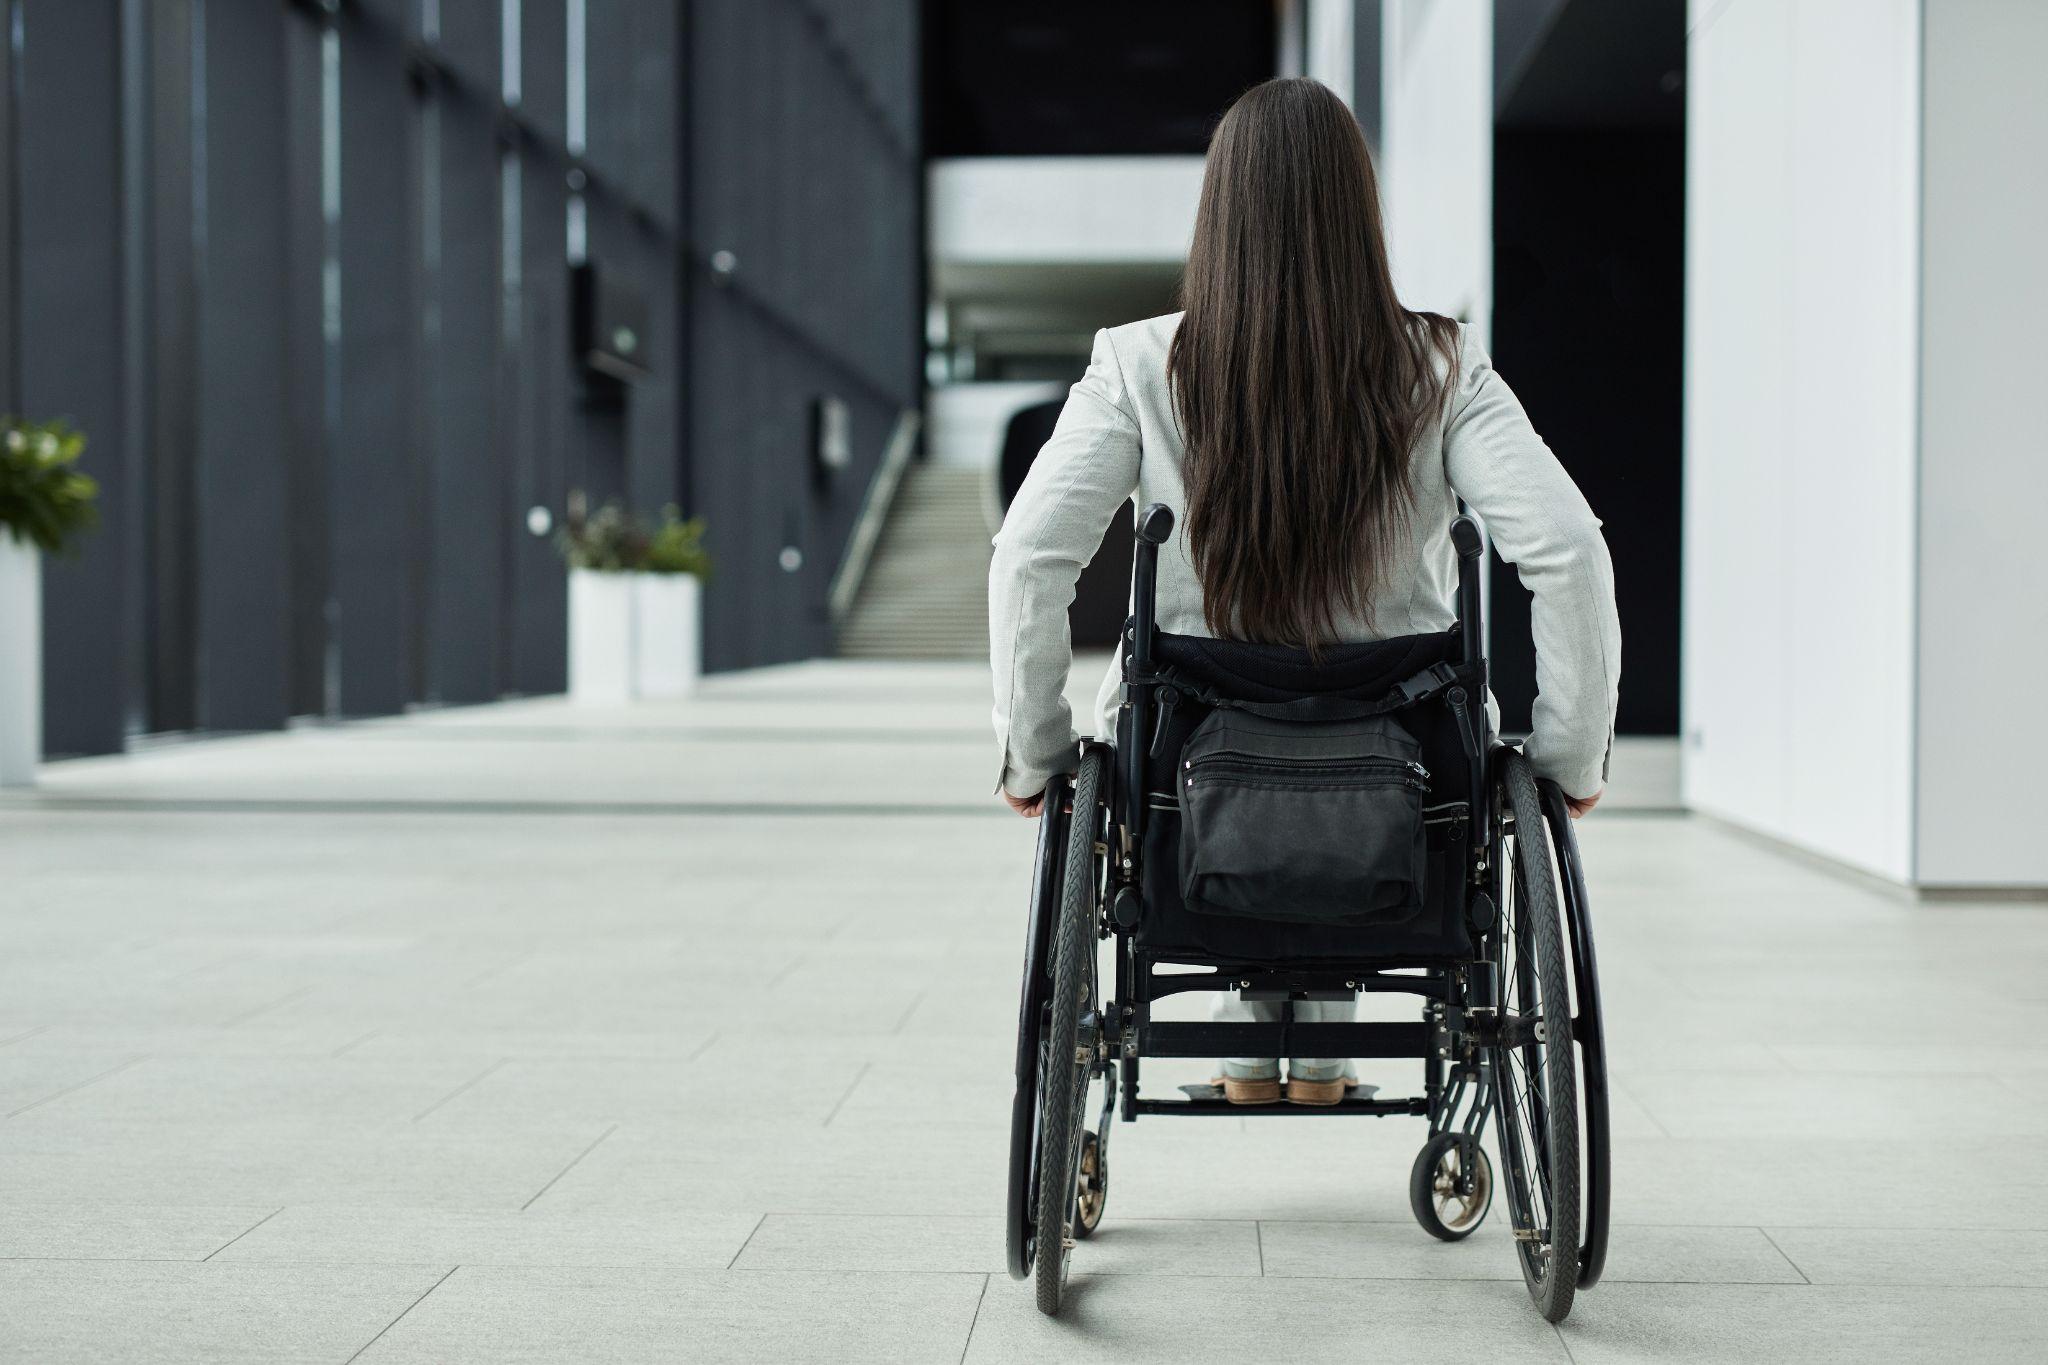 view of woman from behind in wheelchair